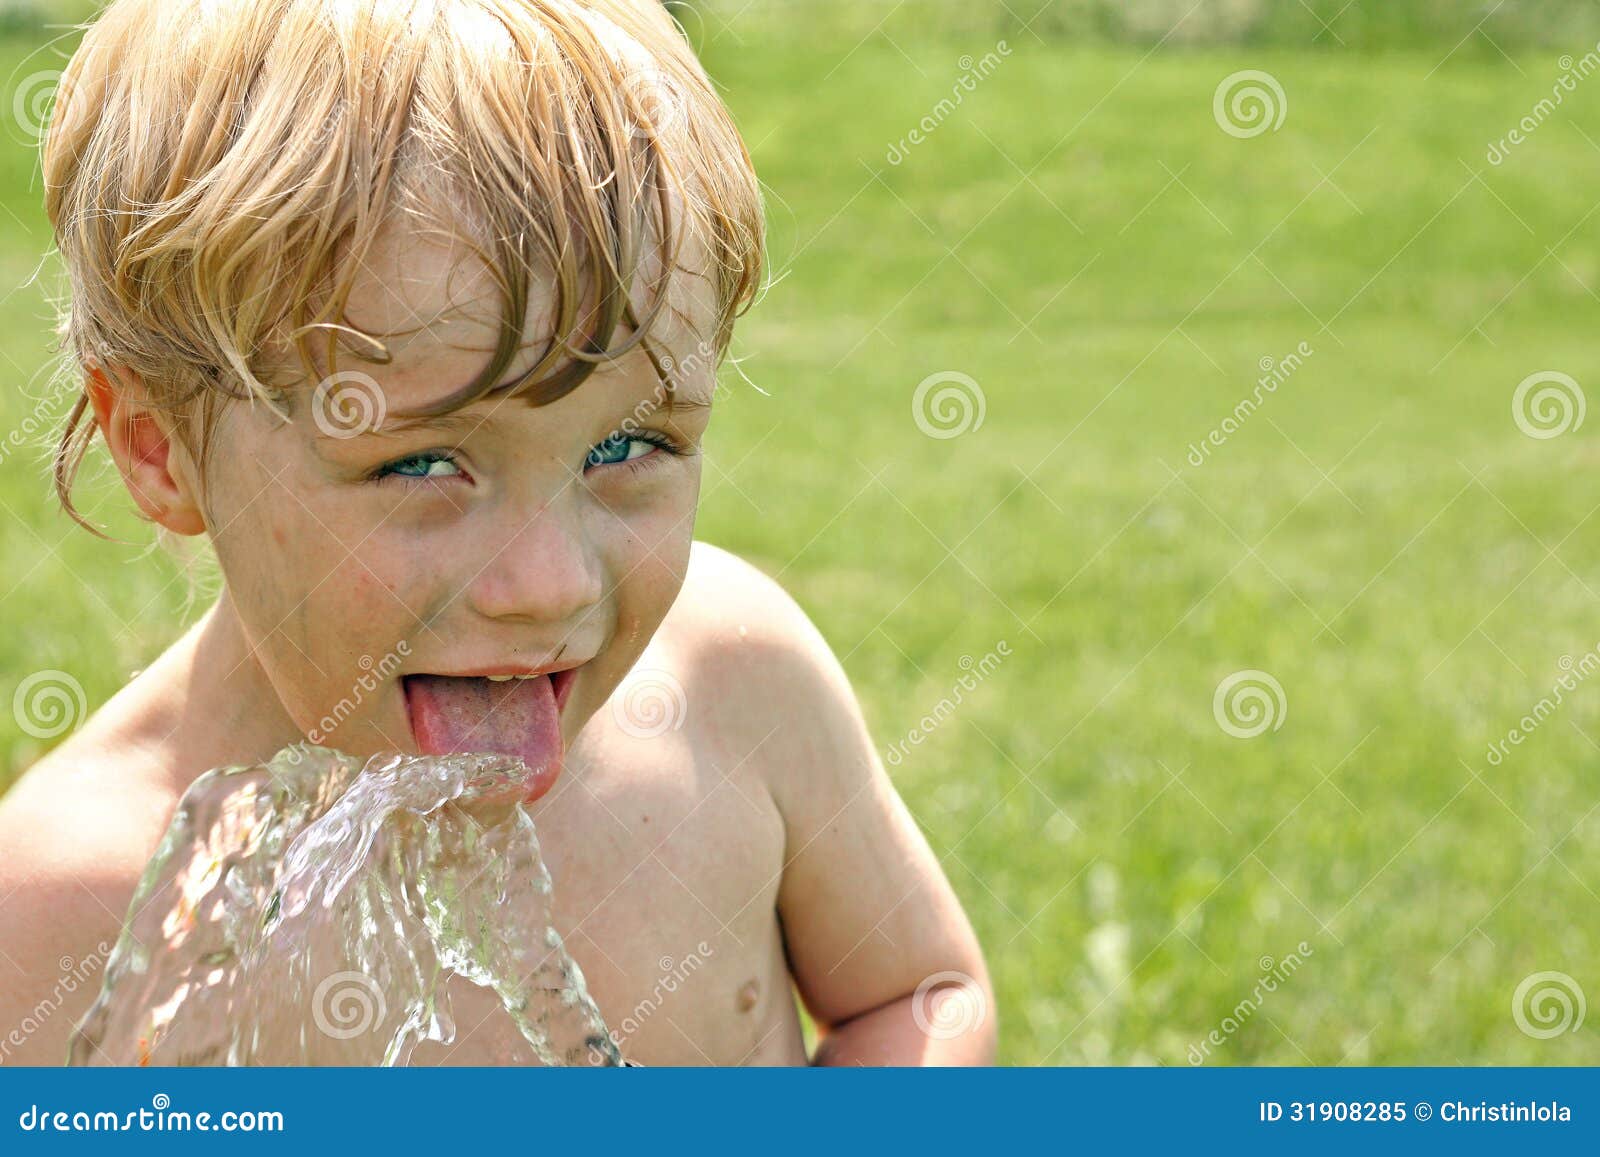 child drinking water from hose